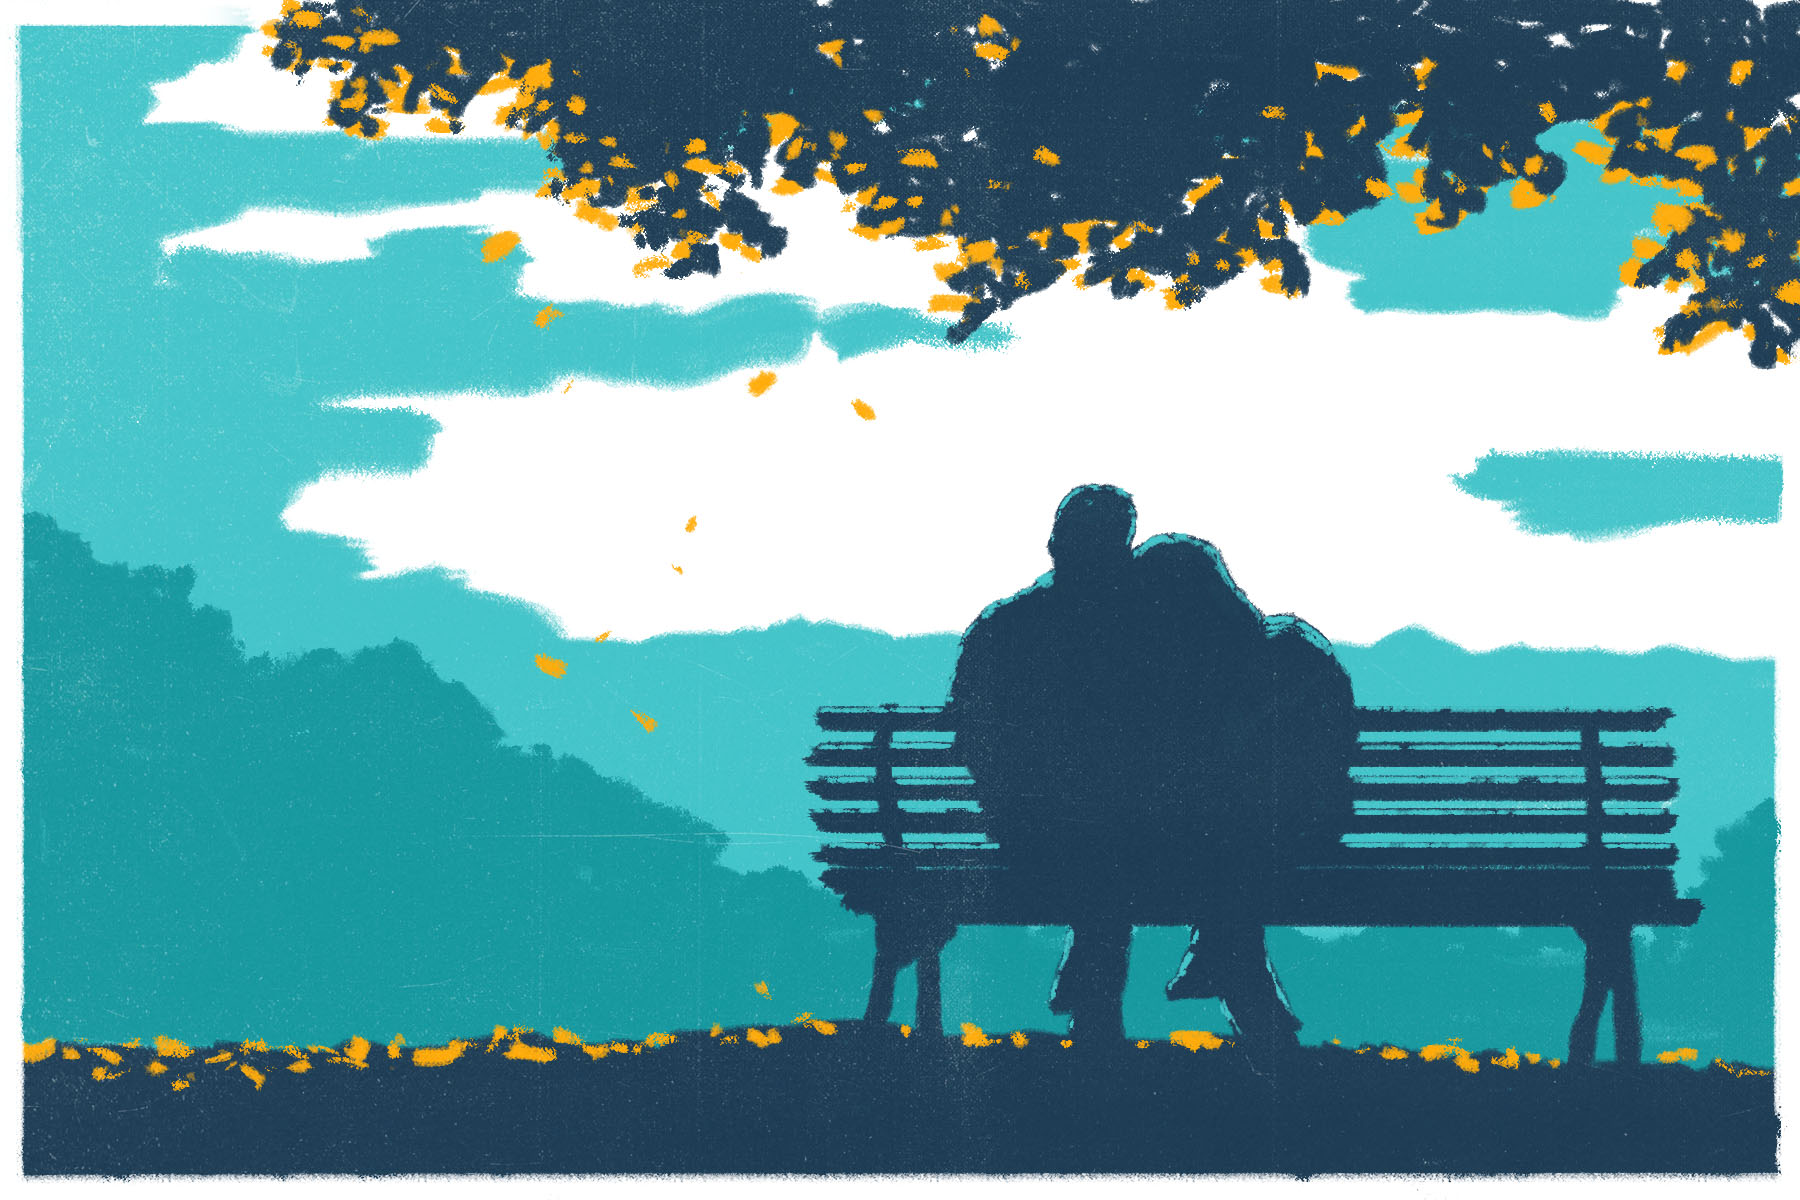 An illustration of a couple sitting on a bench against a background of blue and white clouds